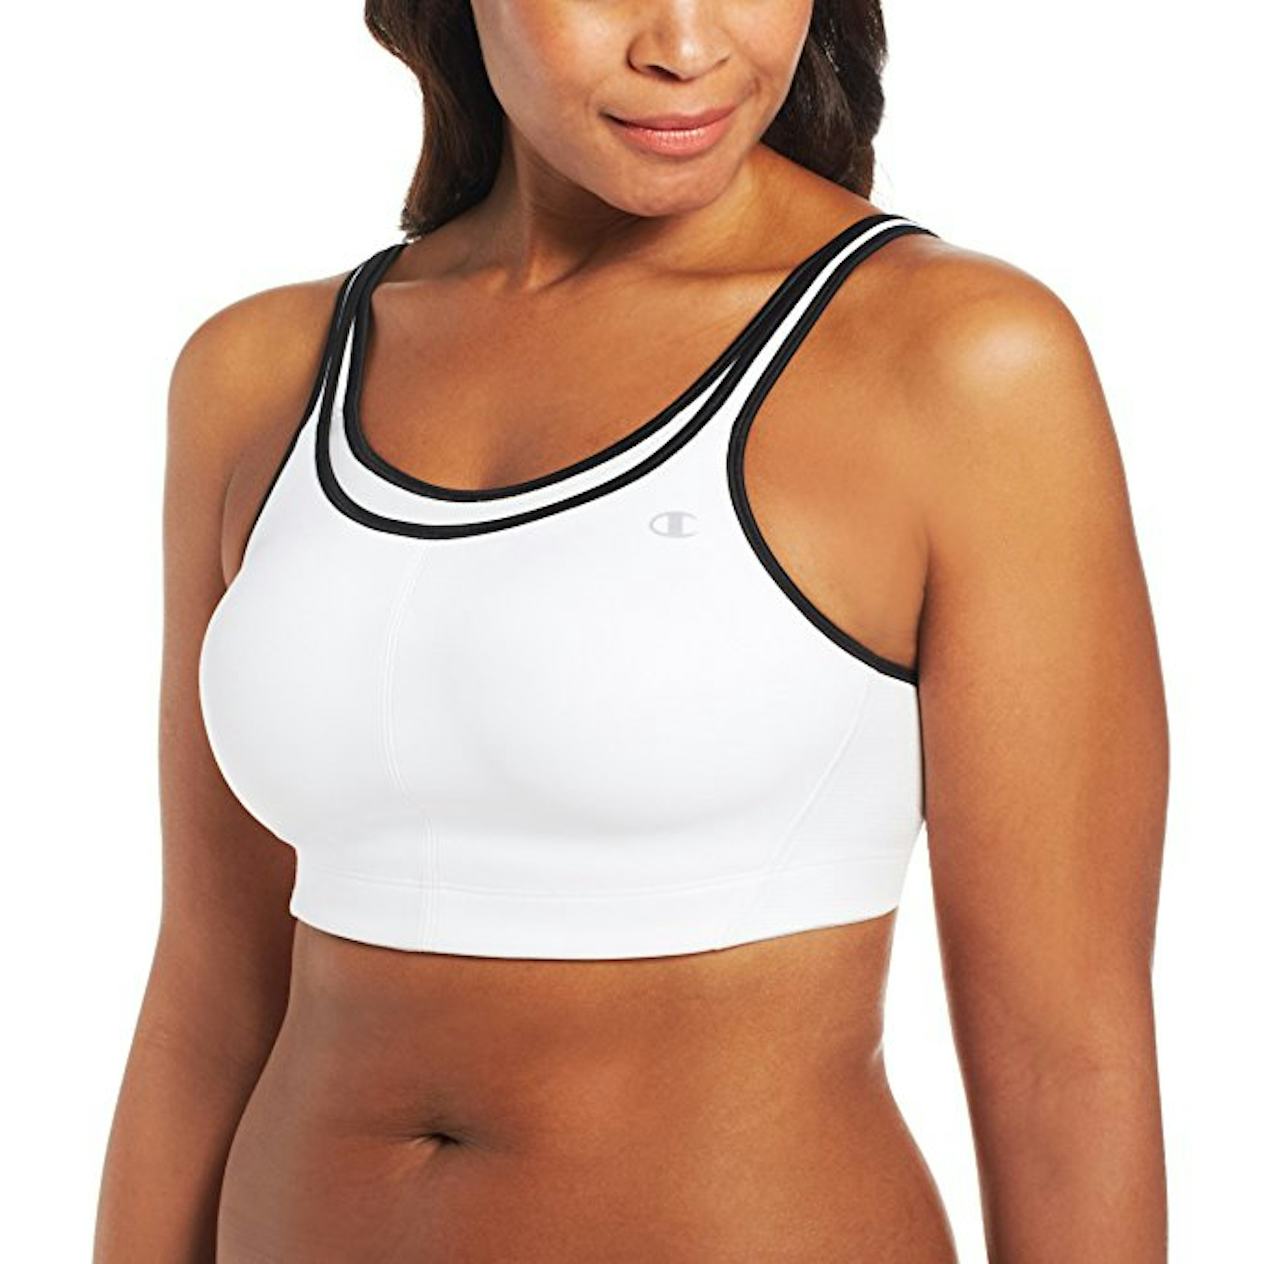 The 9 Best Sports Bras For Ddd Cups